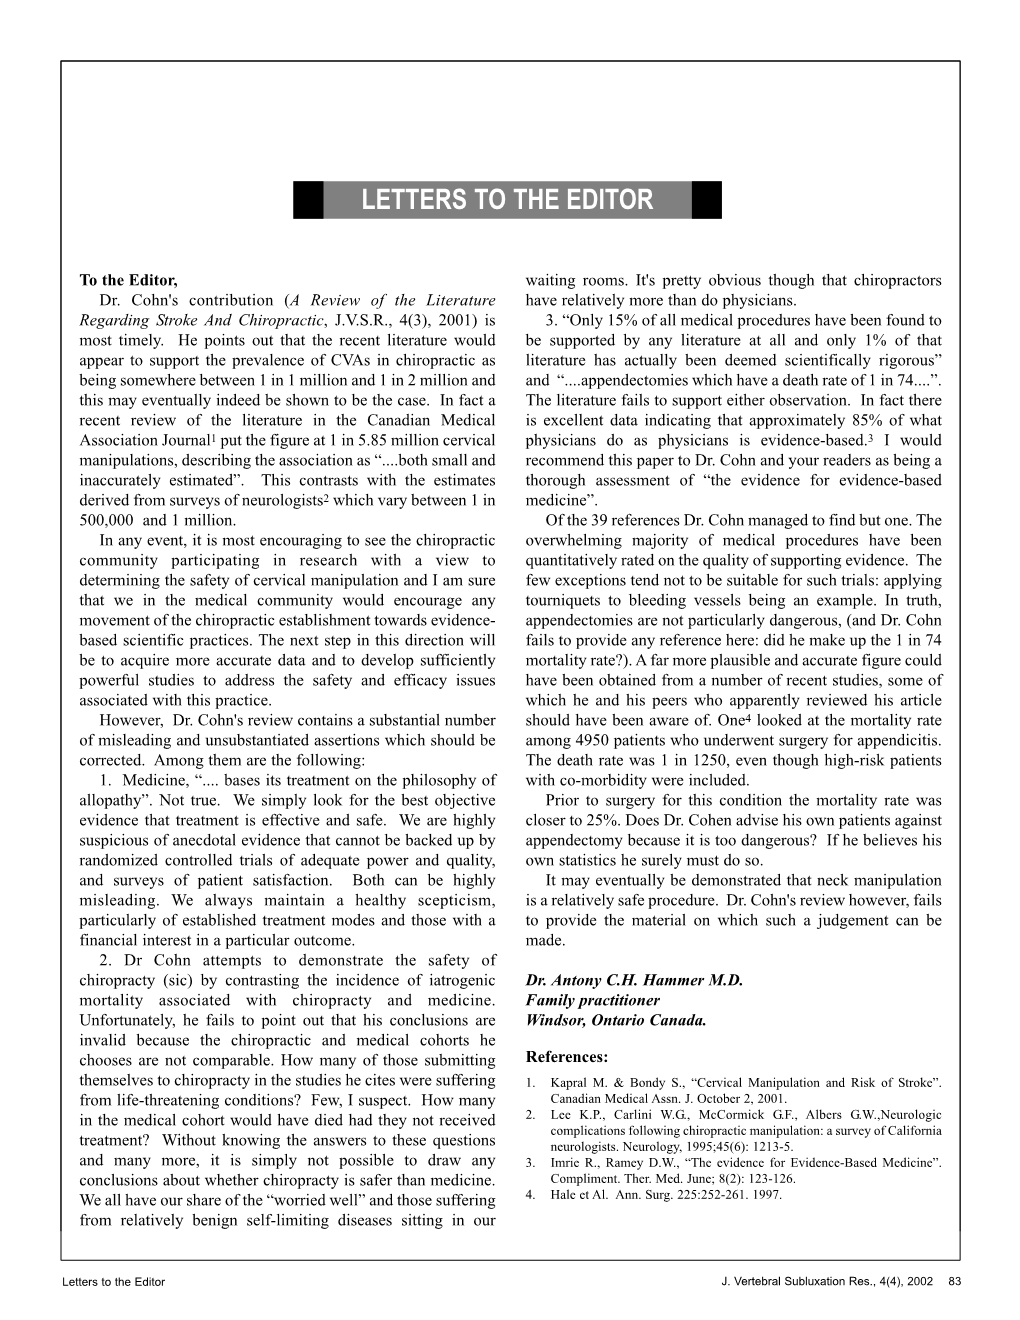 Chiropractic Safety Letter to the Editor